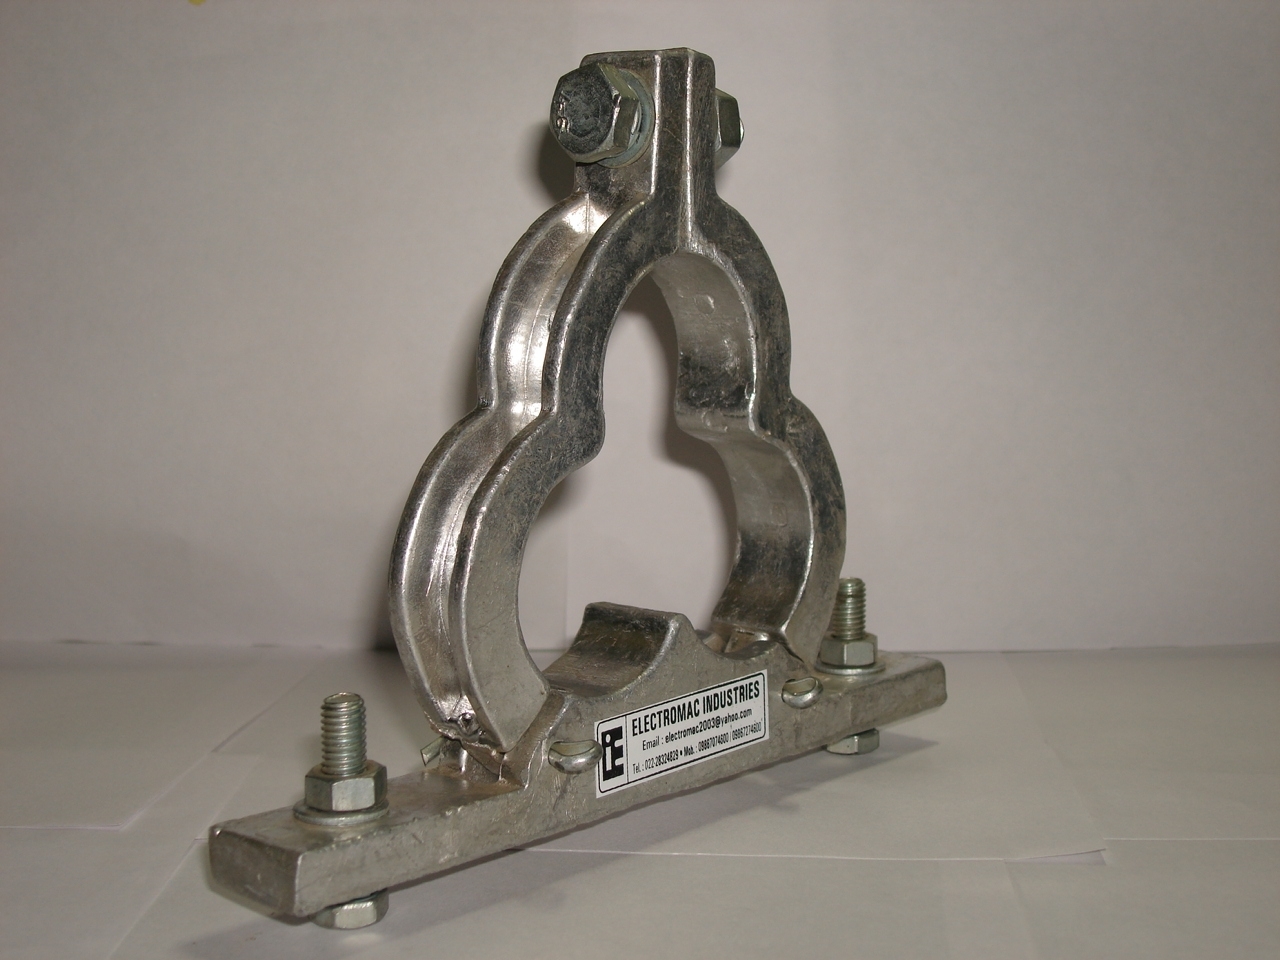 Trefoil Clamp Cleat